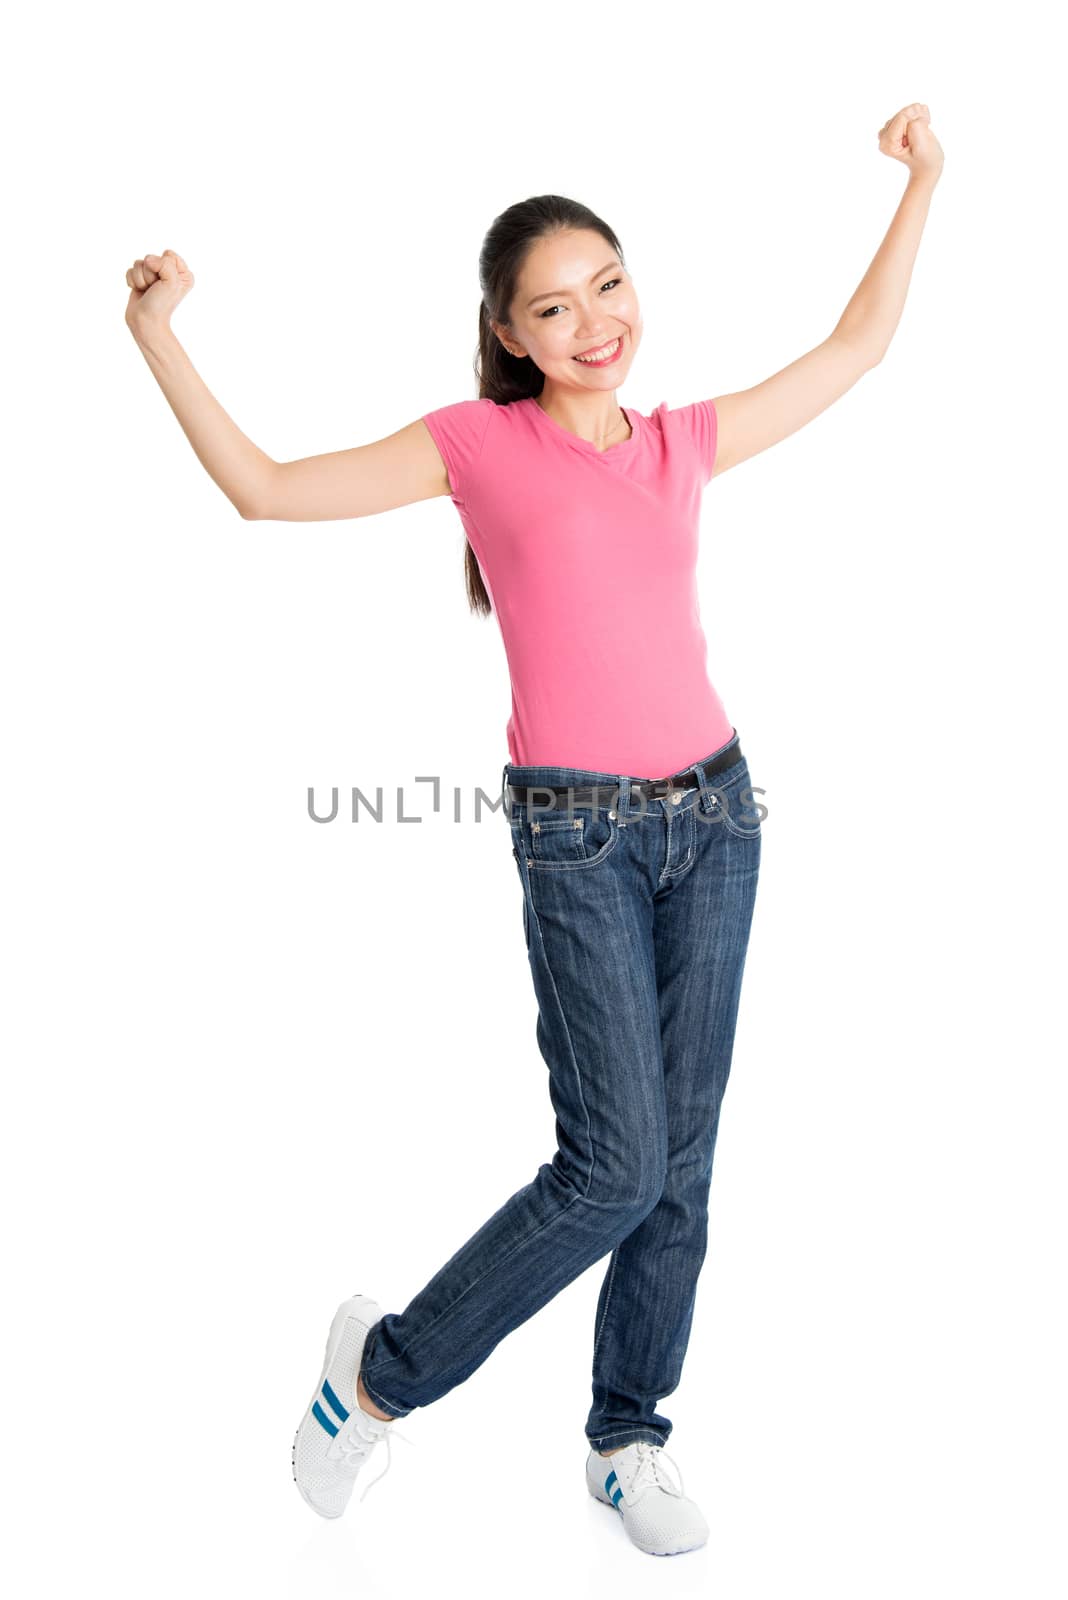 Portrait of excited young Asian girl in pink shirt and jeans arms raised celebrating success, full body standing isolated on white background.